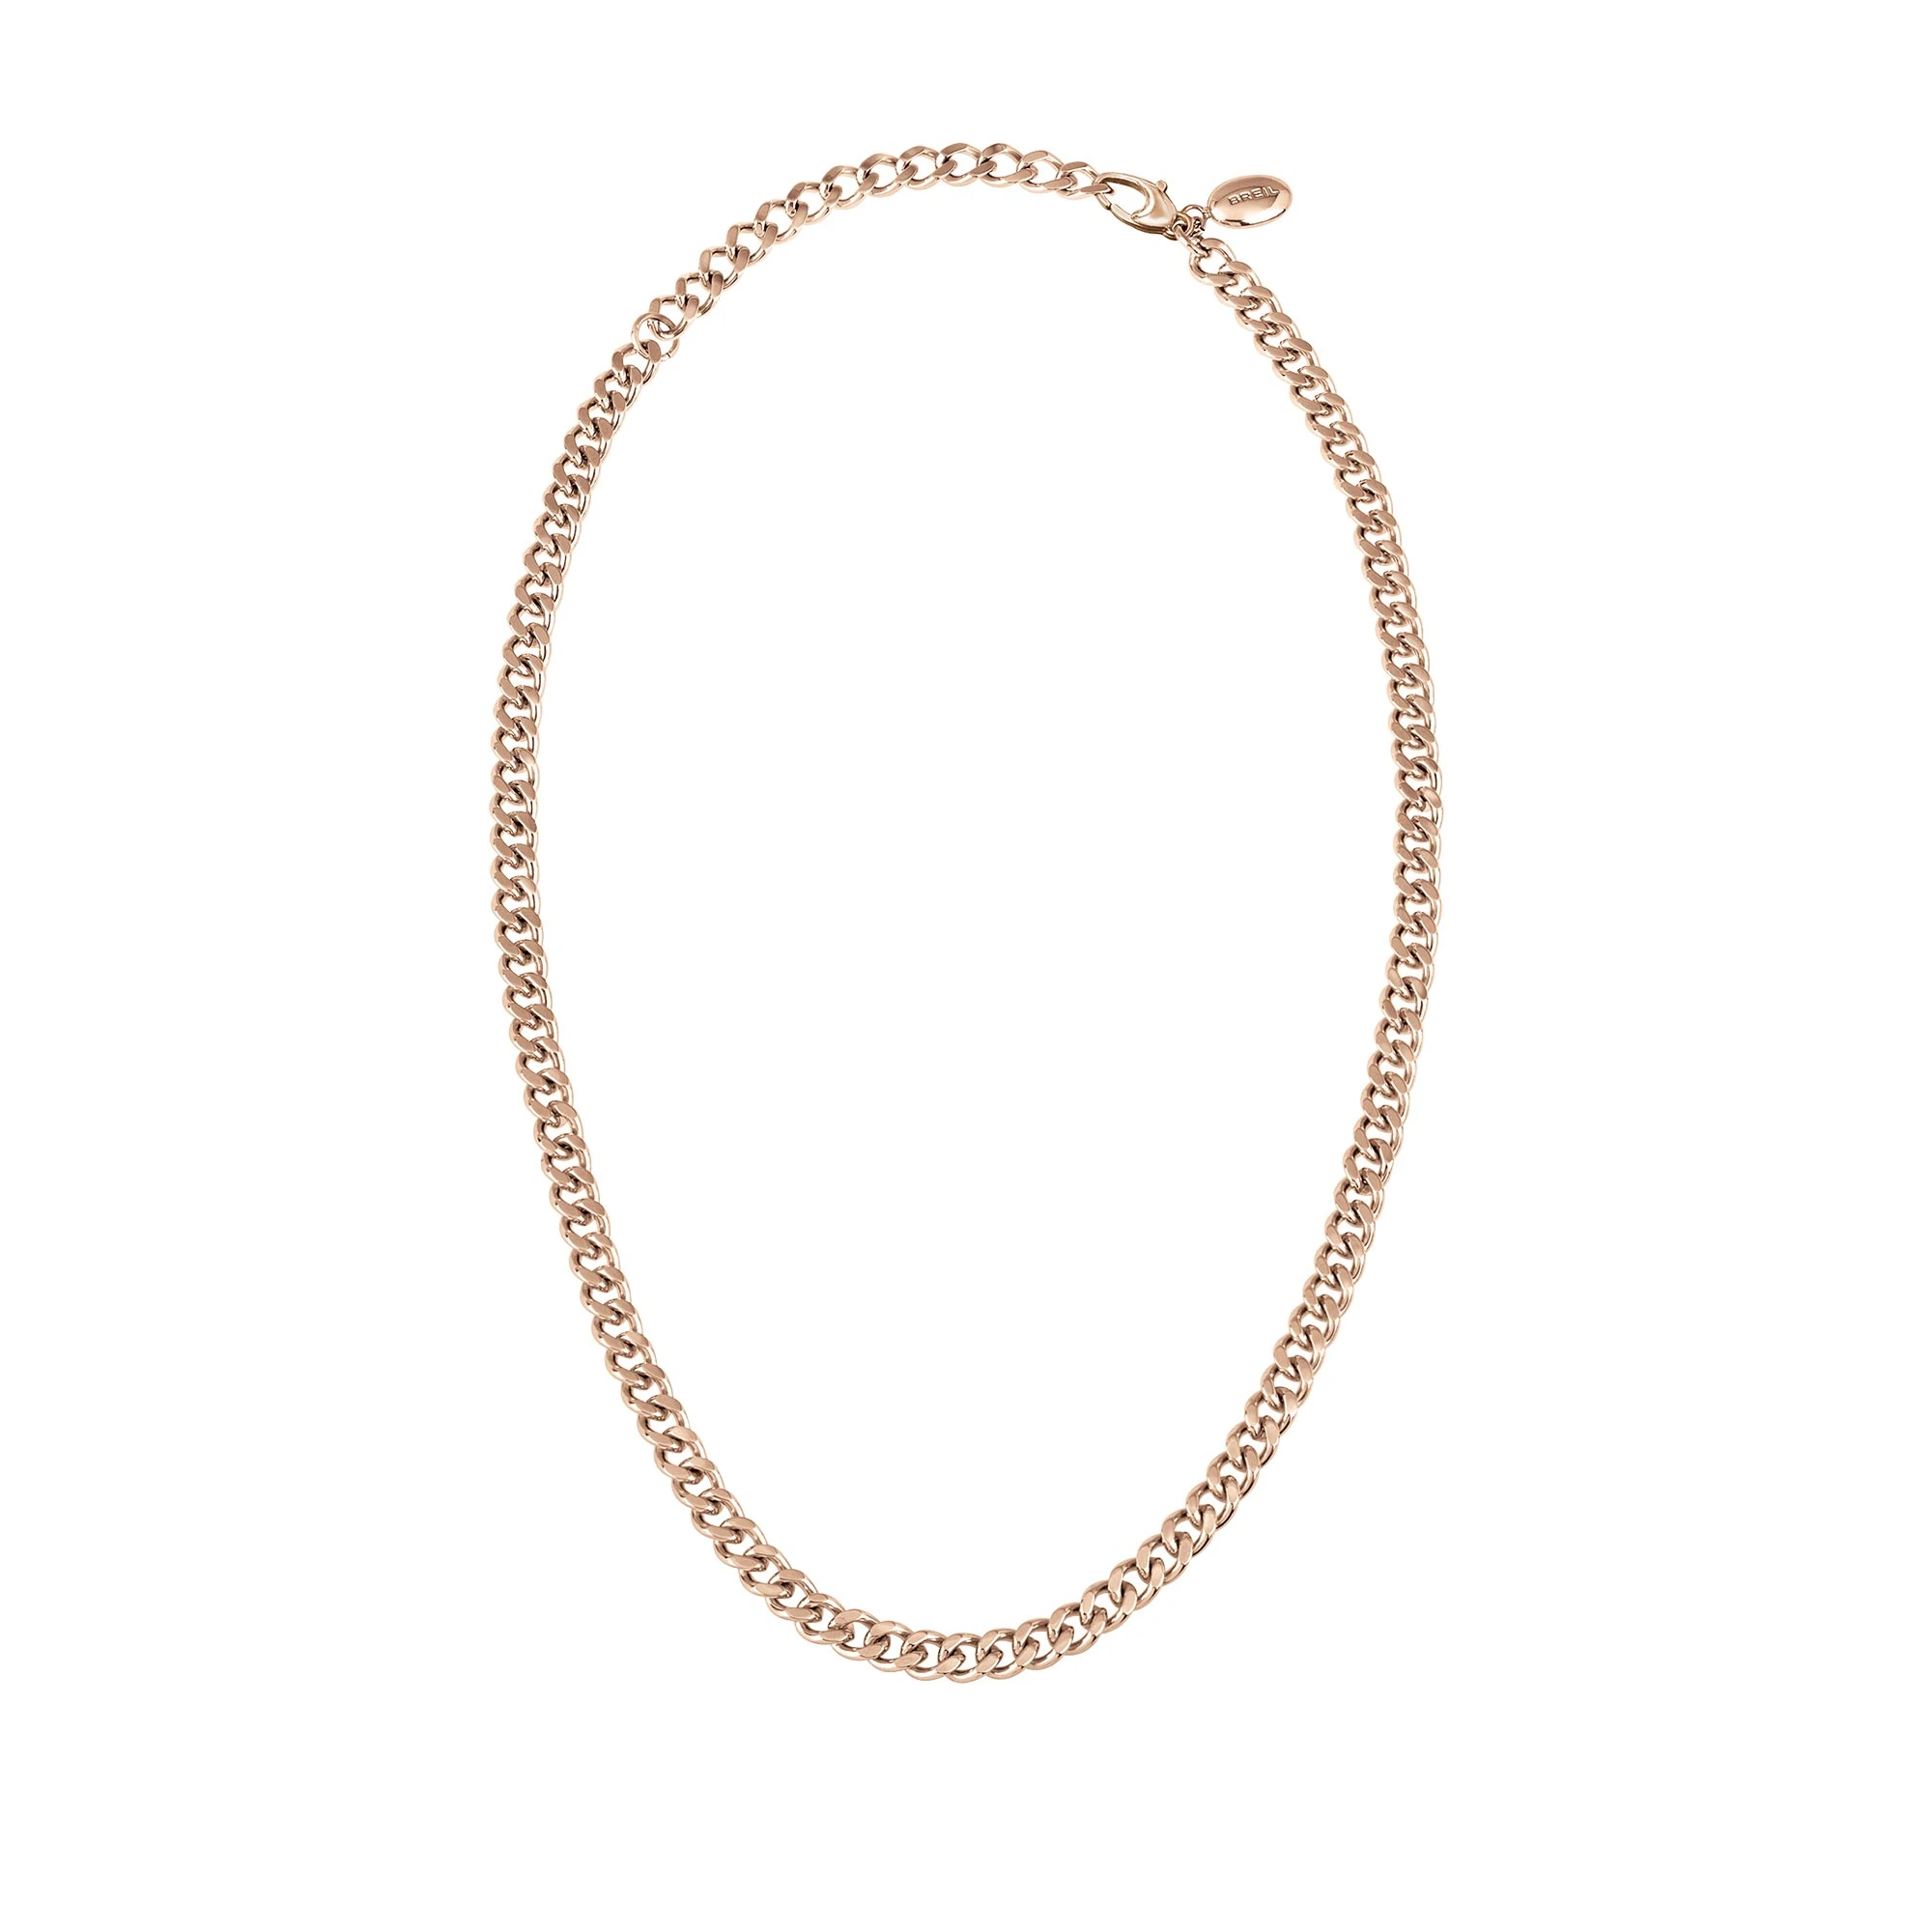 JOIN UP - COLLANA A CATENA IN ACCIAIO LUCIDO IP ROSE - 1 - TJ2915 | Breil